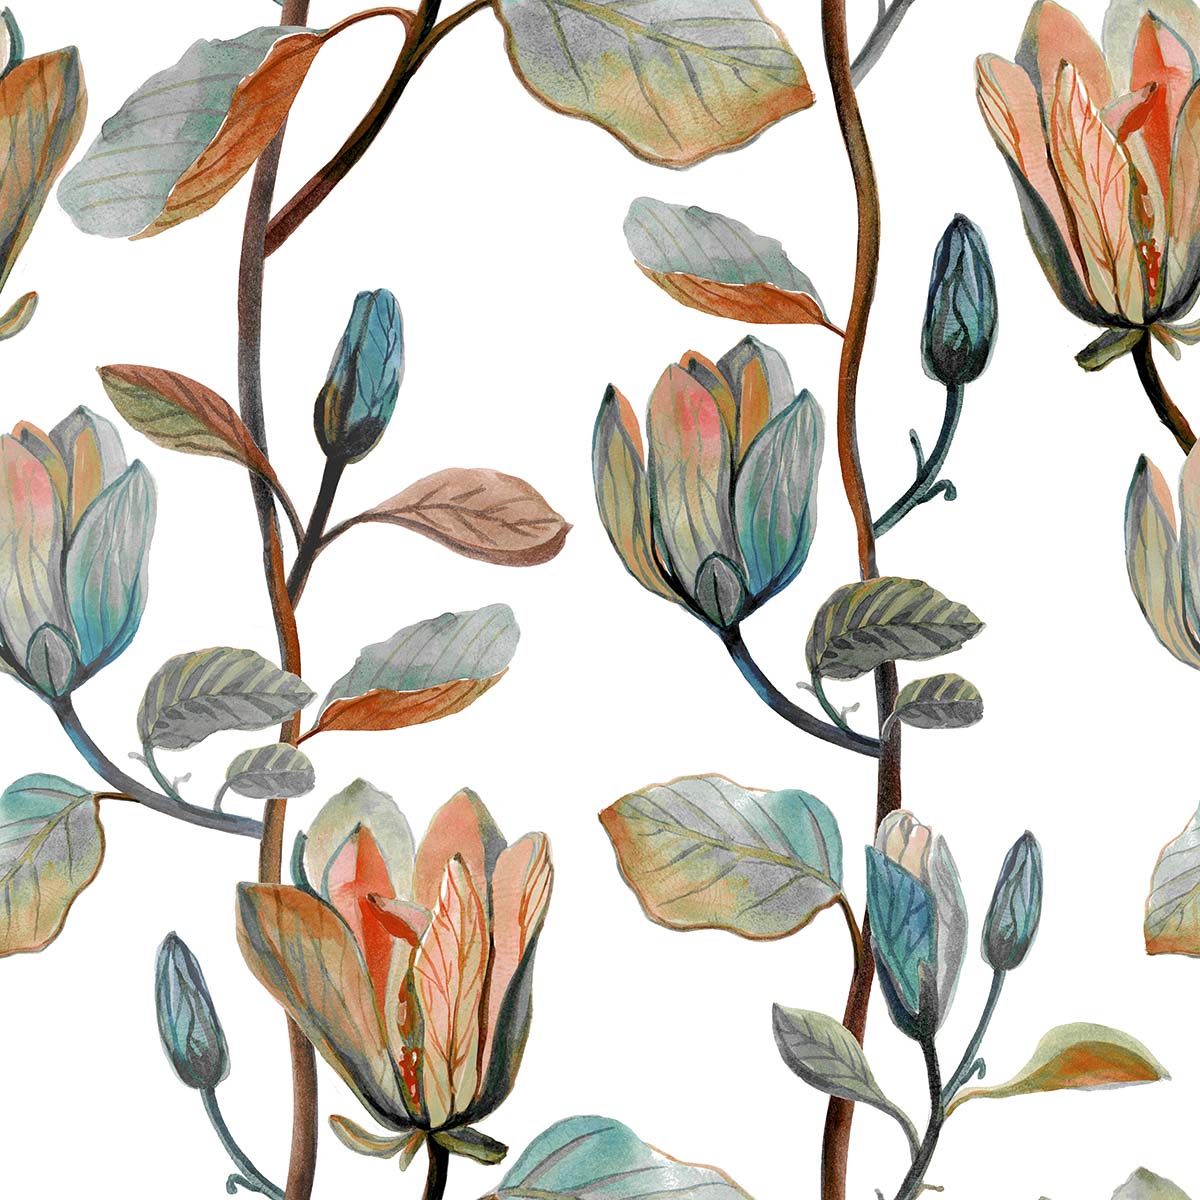 A pattern of flowers and leaves